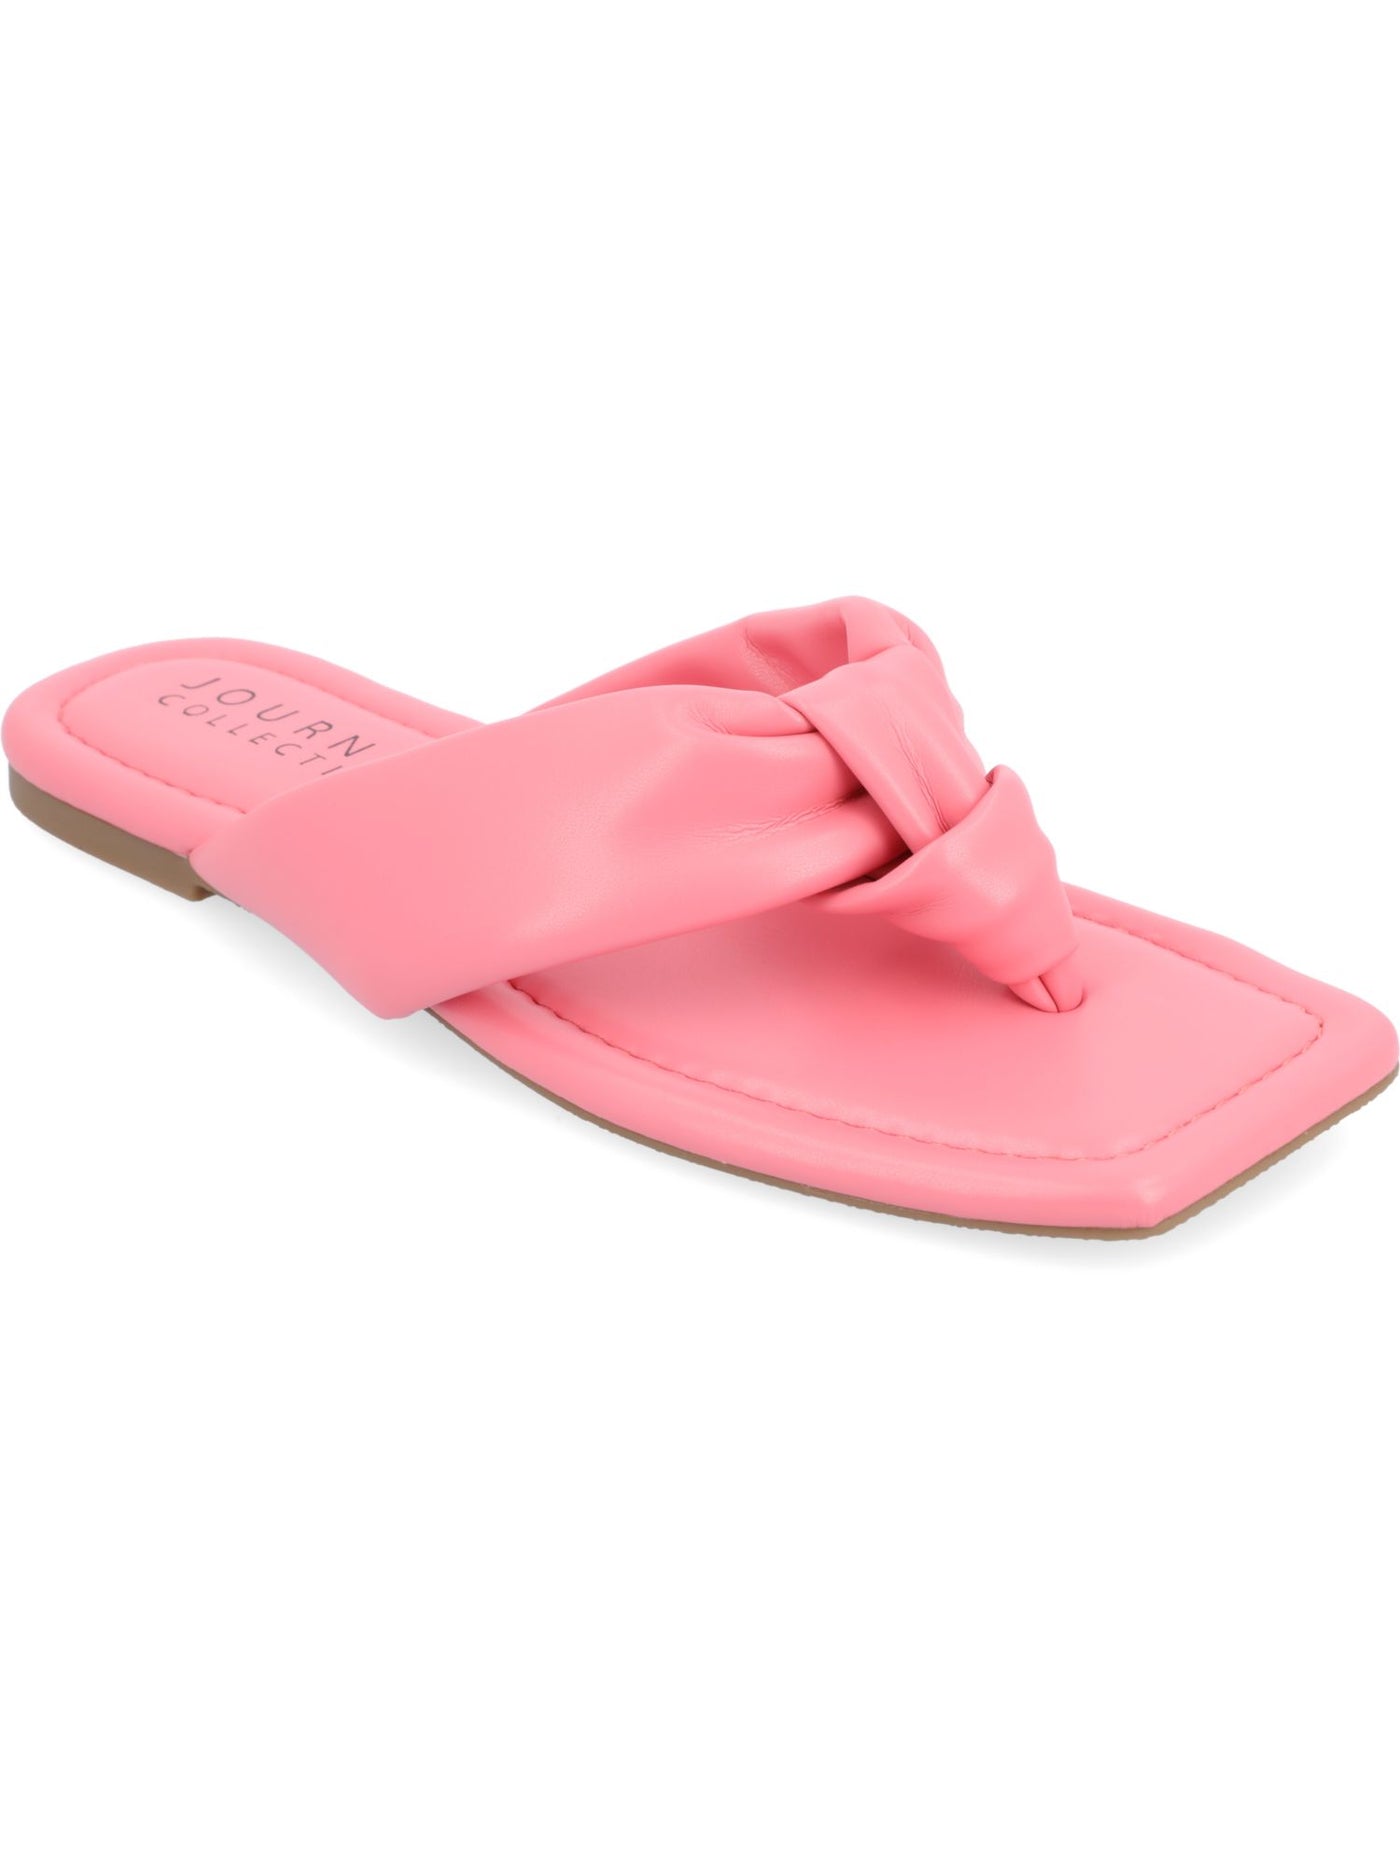 JOURNEE COLLECTION Womens Pink Cushioned Ares Square Toe Slip On Thong Sandals Shoes 10 M